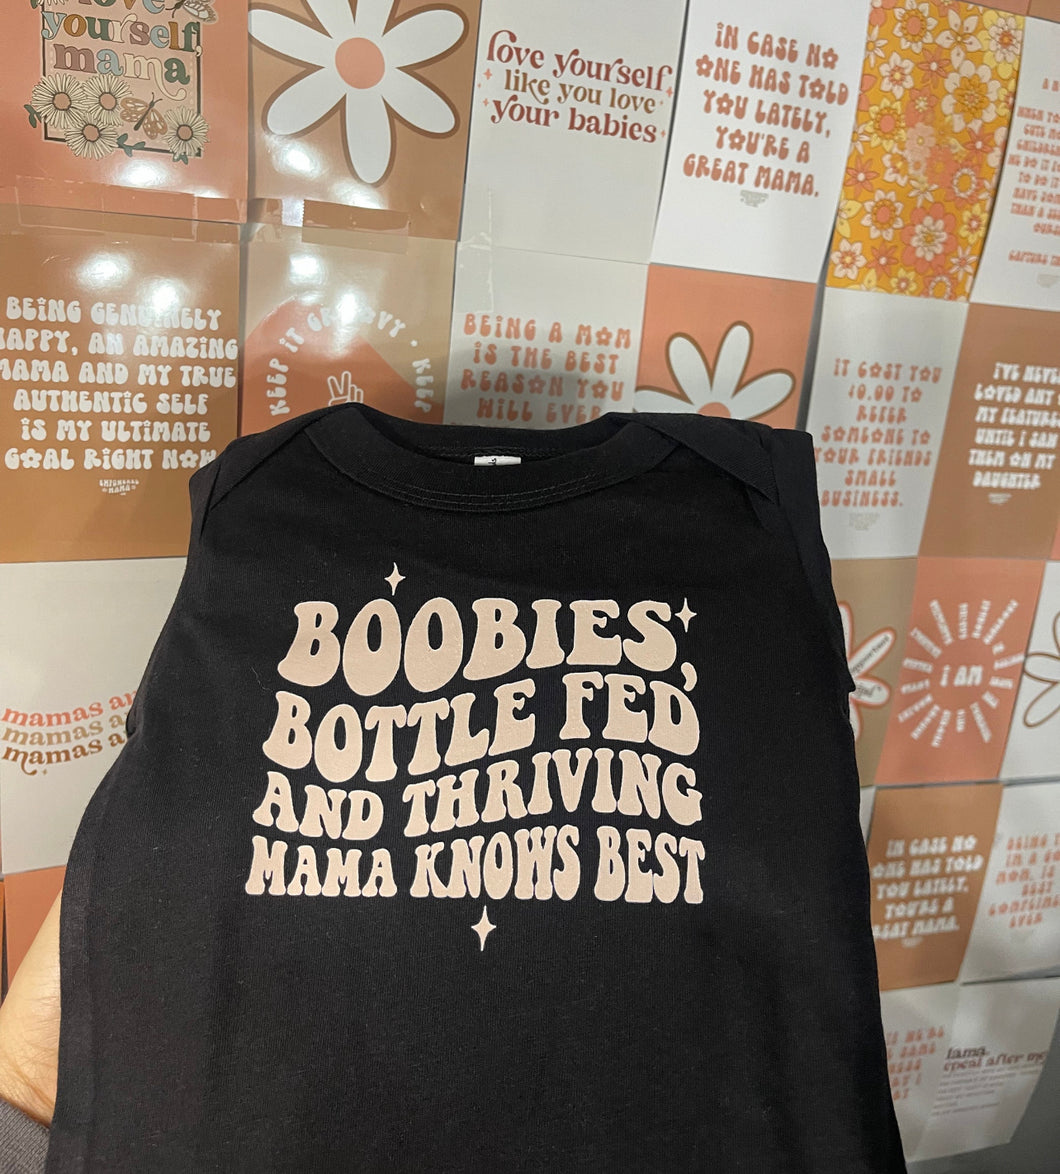 Boobies And Bottle Fed